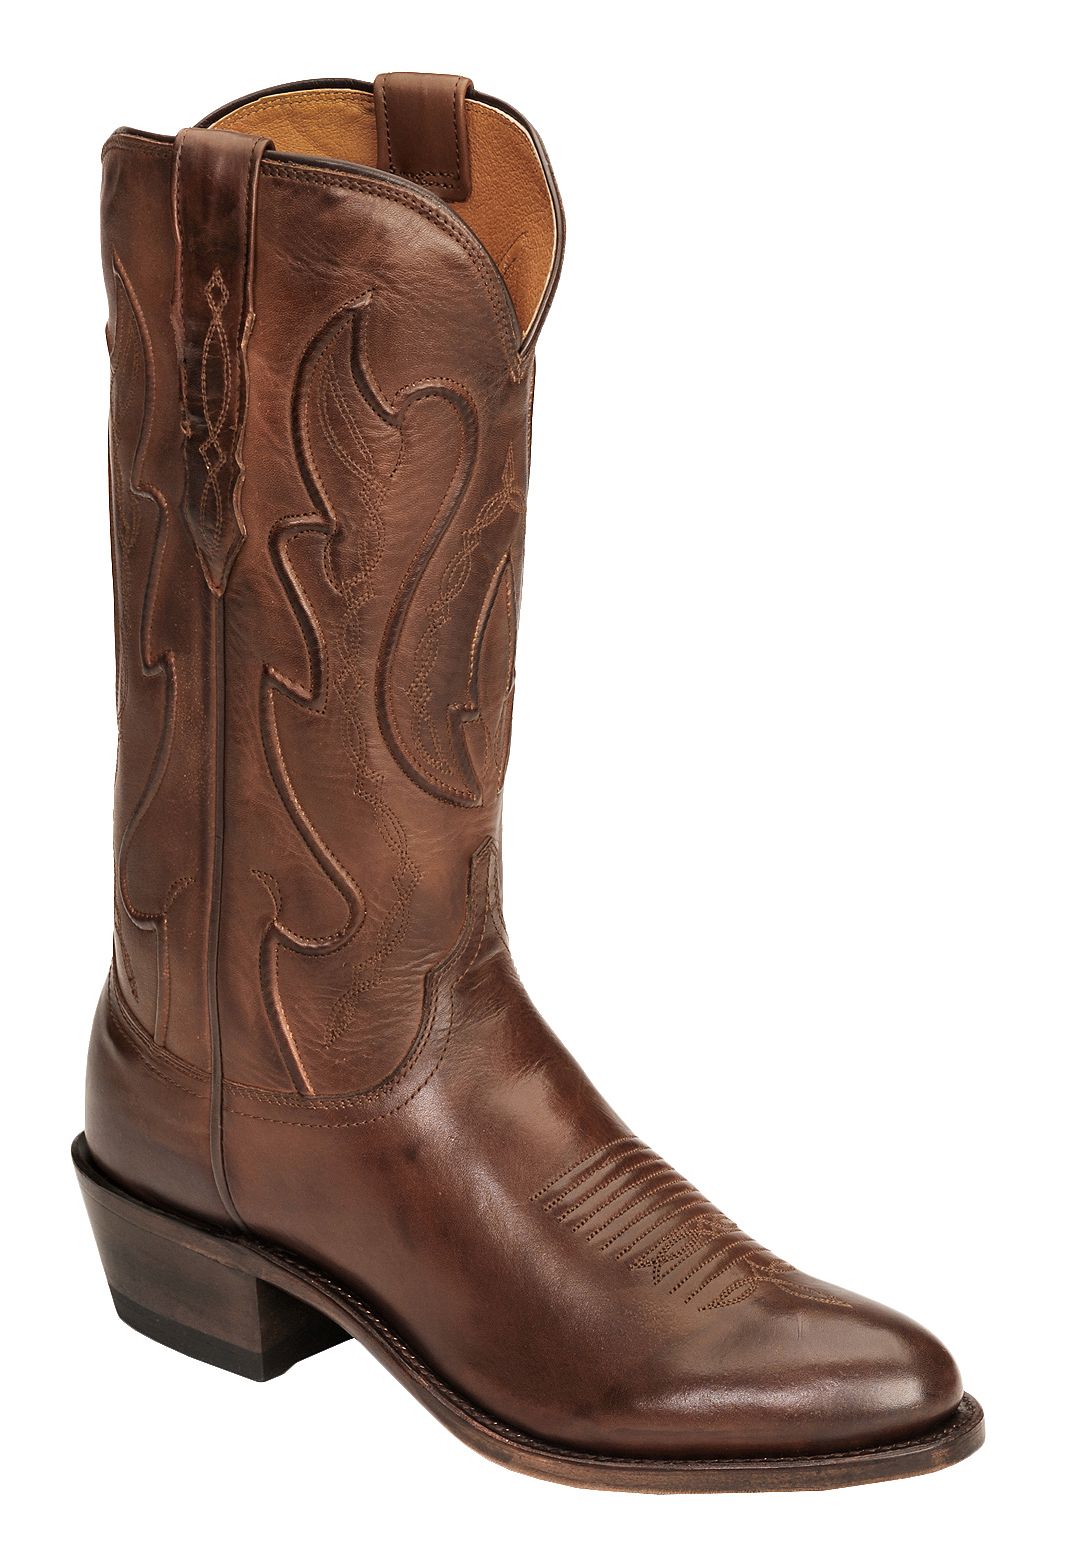 Lucchese Handcrafted 1883 Ranch Hand Cowboy Boots - Round Toe | Sheplers